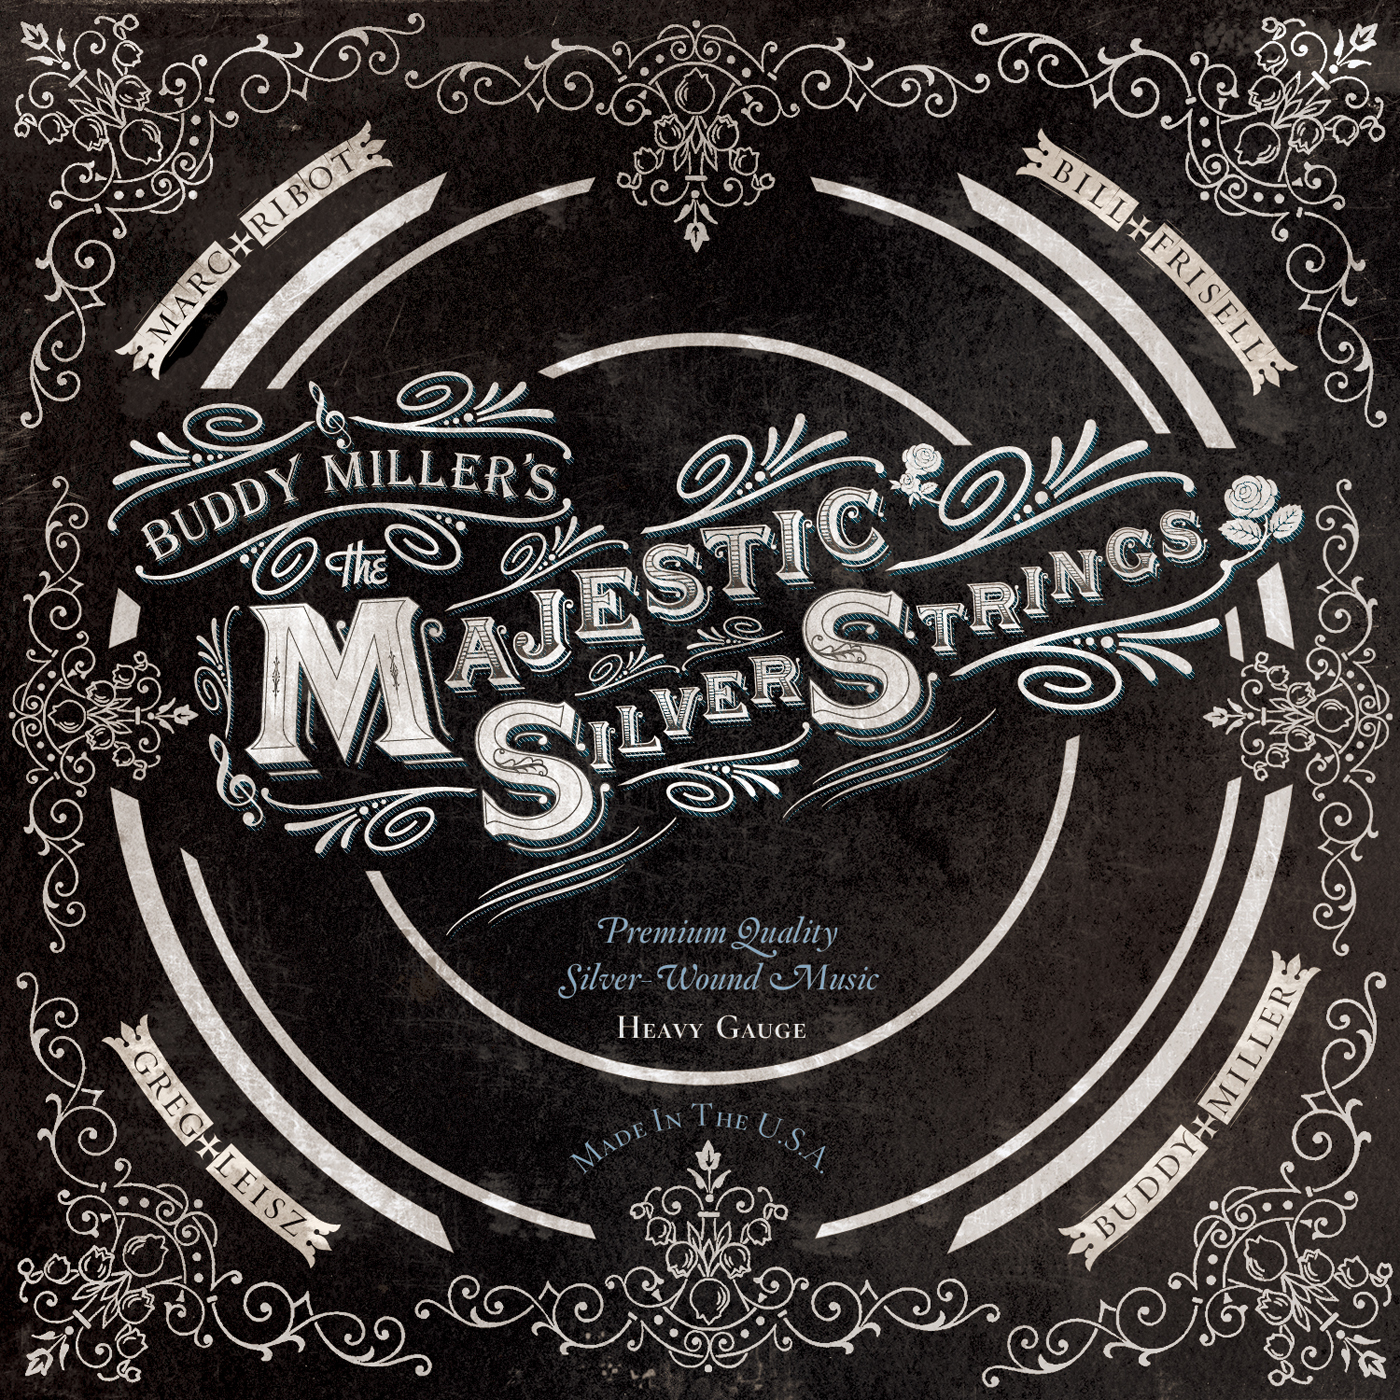 MAJESTIC SILVER STRINGS (W/DVD) (DIG)